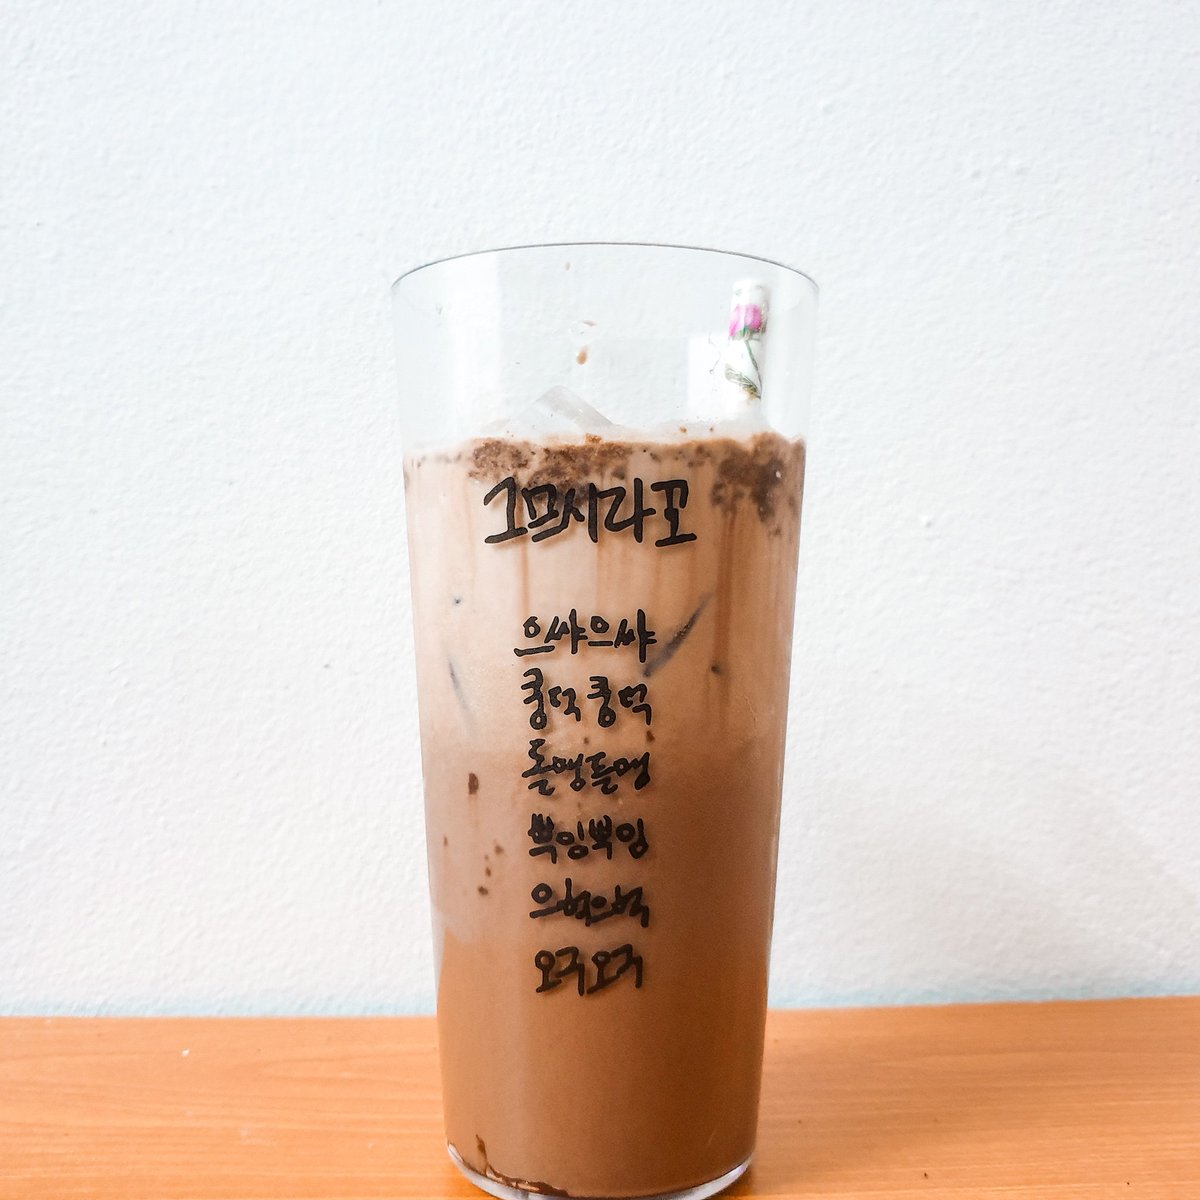 Made this superr milky milo last few days